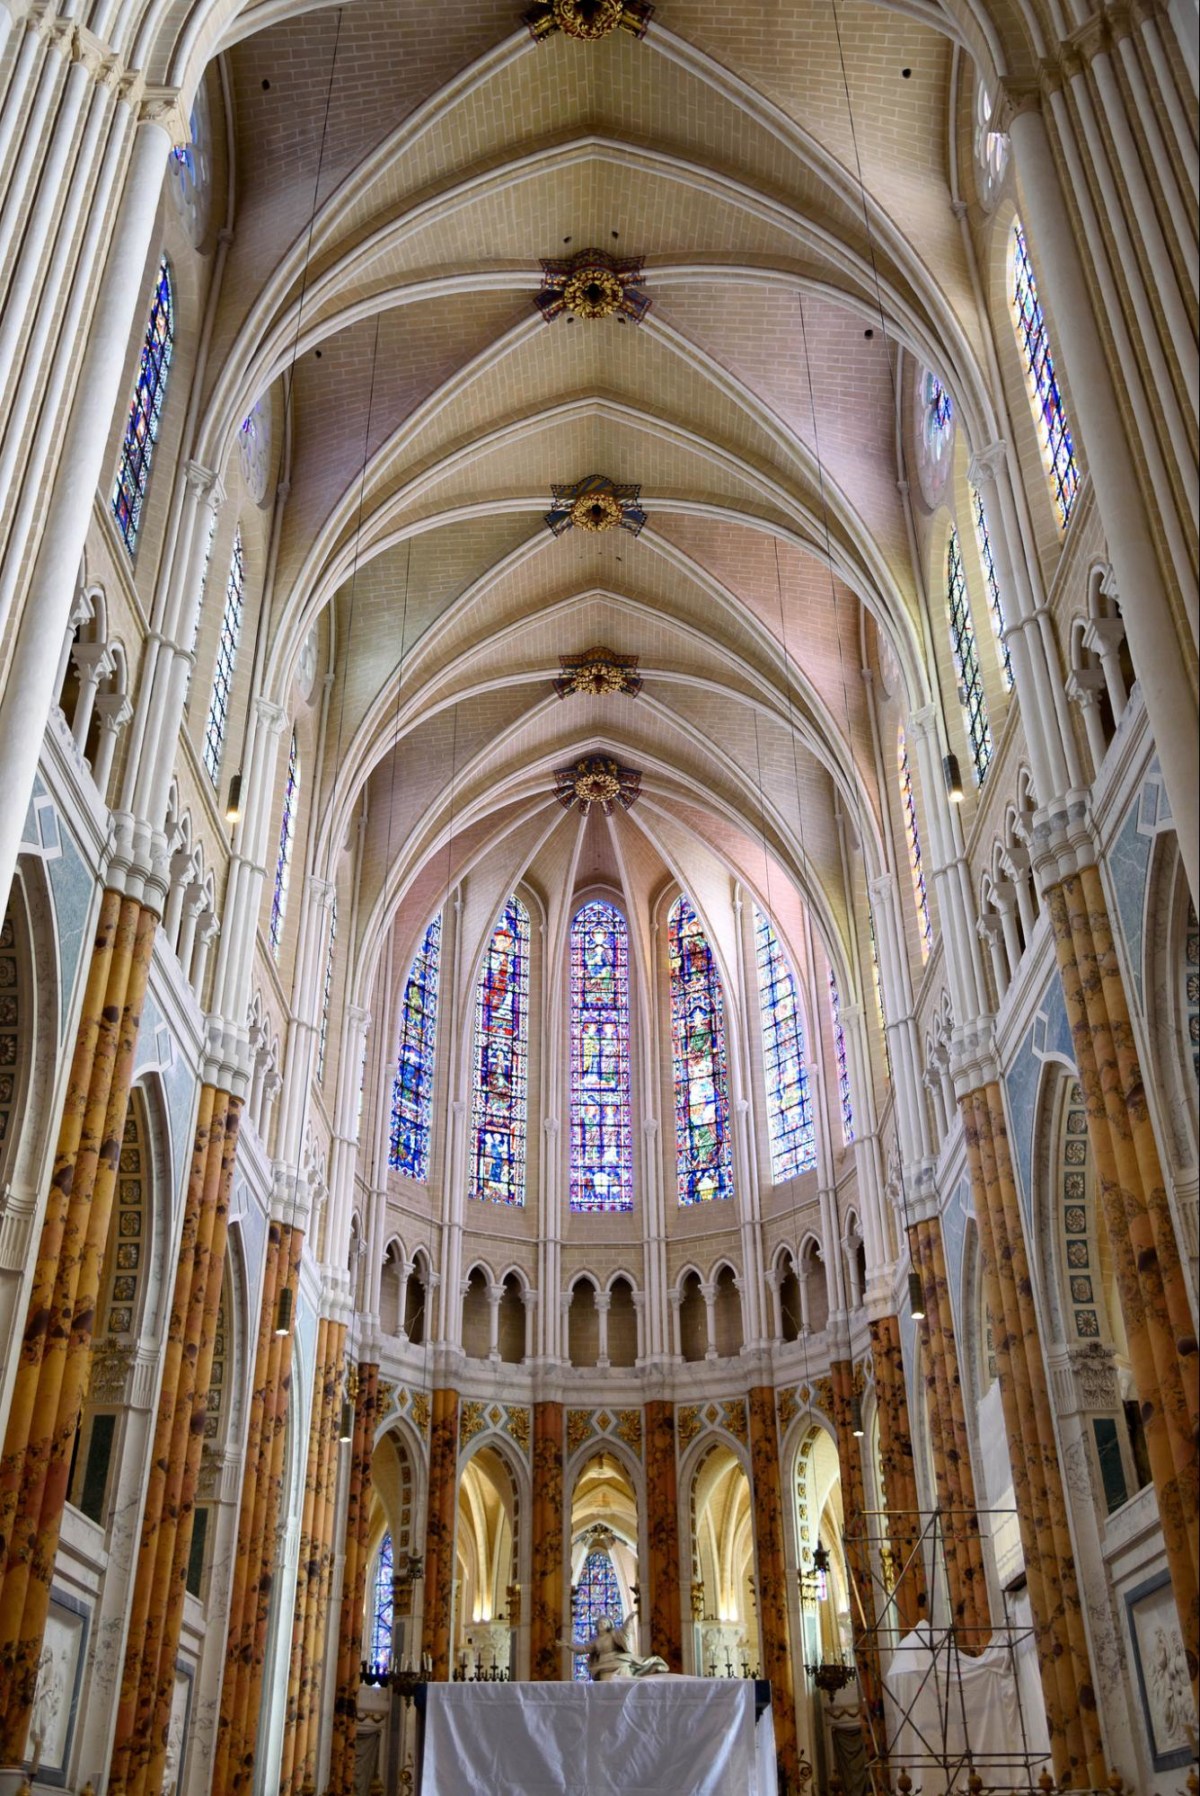 there are various excursions to the cathedral